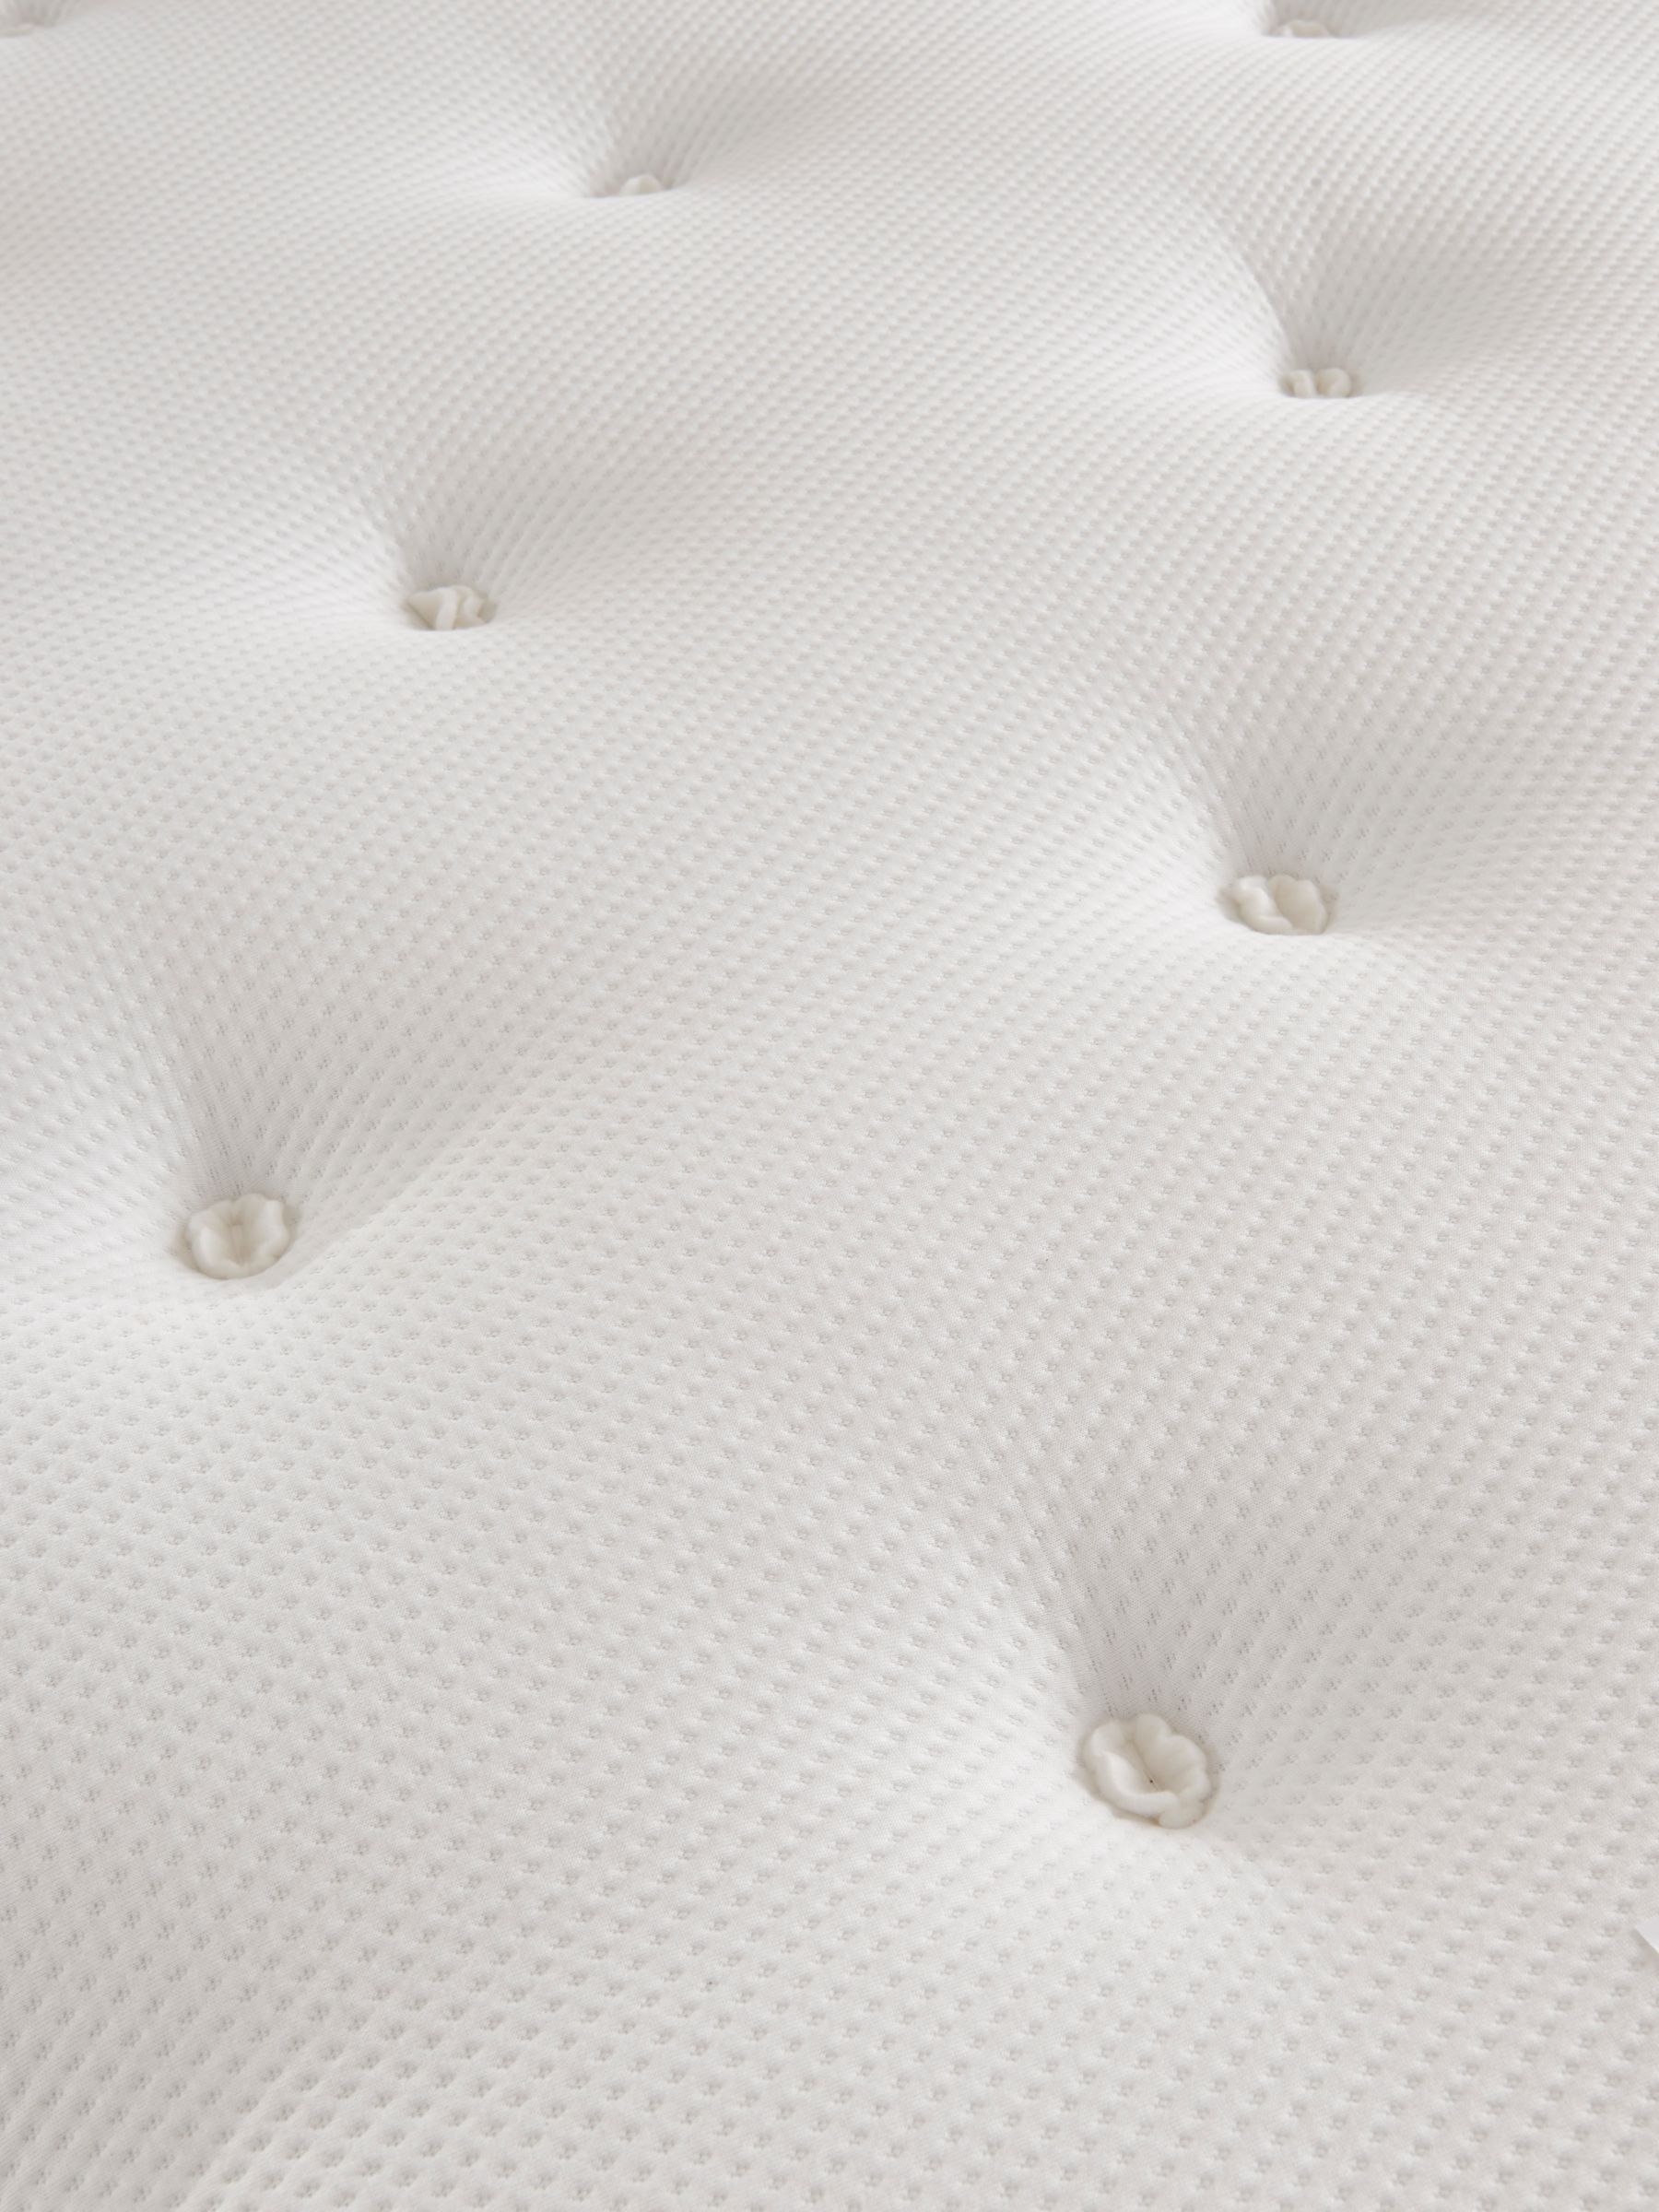 Photo of John lewis ortho support 2000 pocket spring mattress medium to firm tension king size